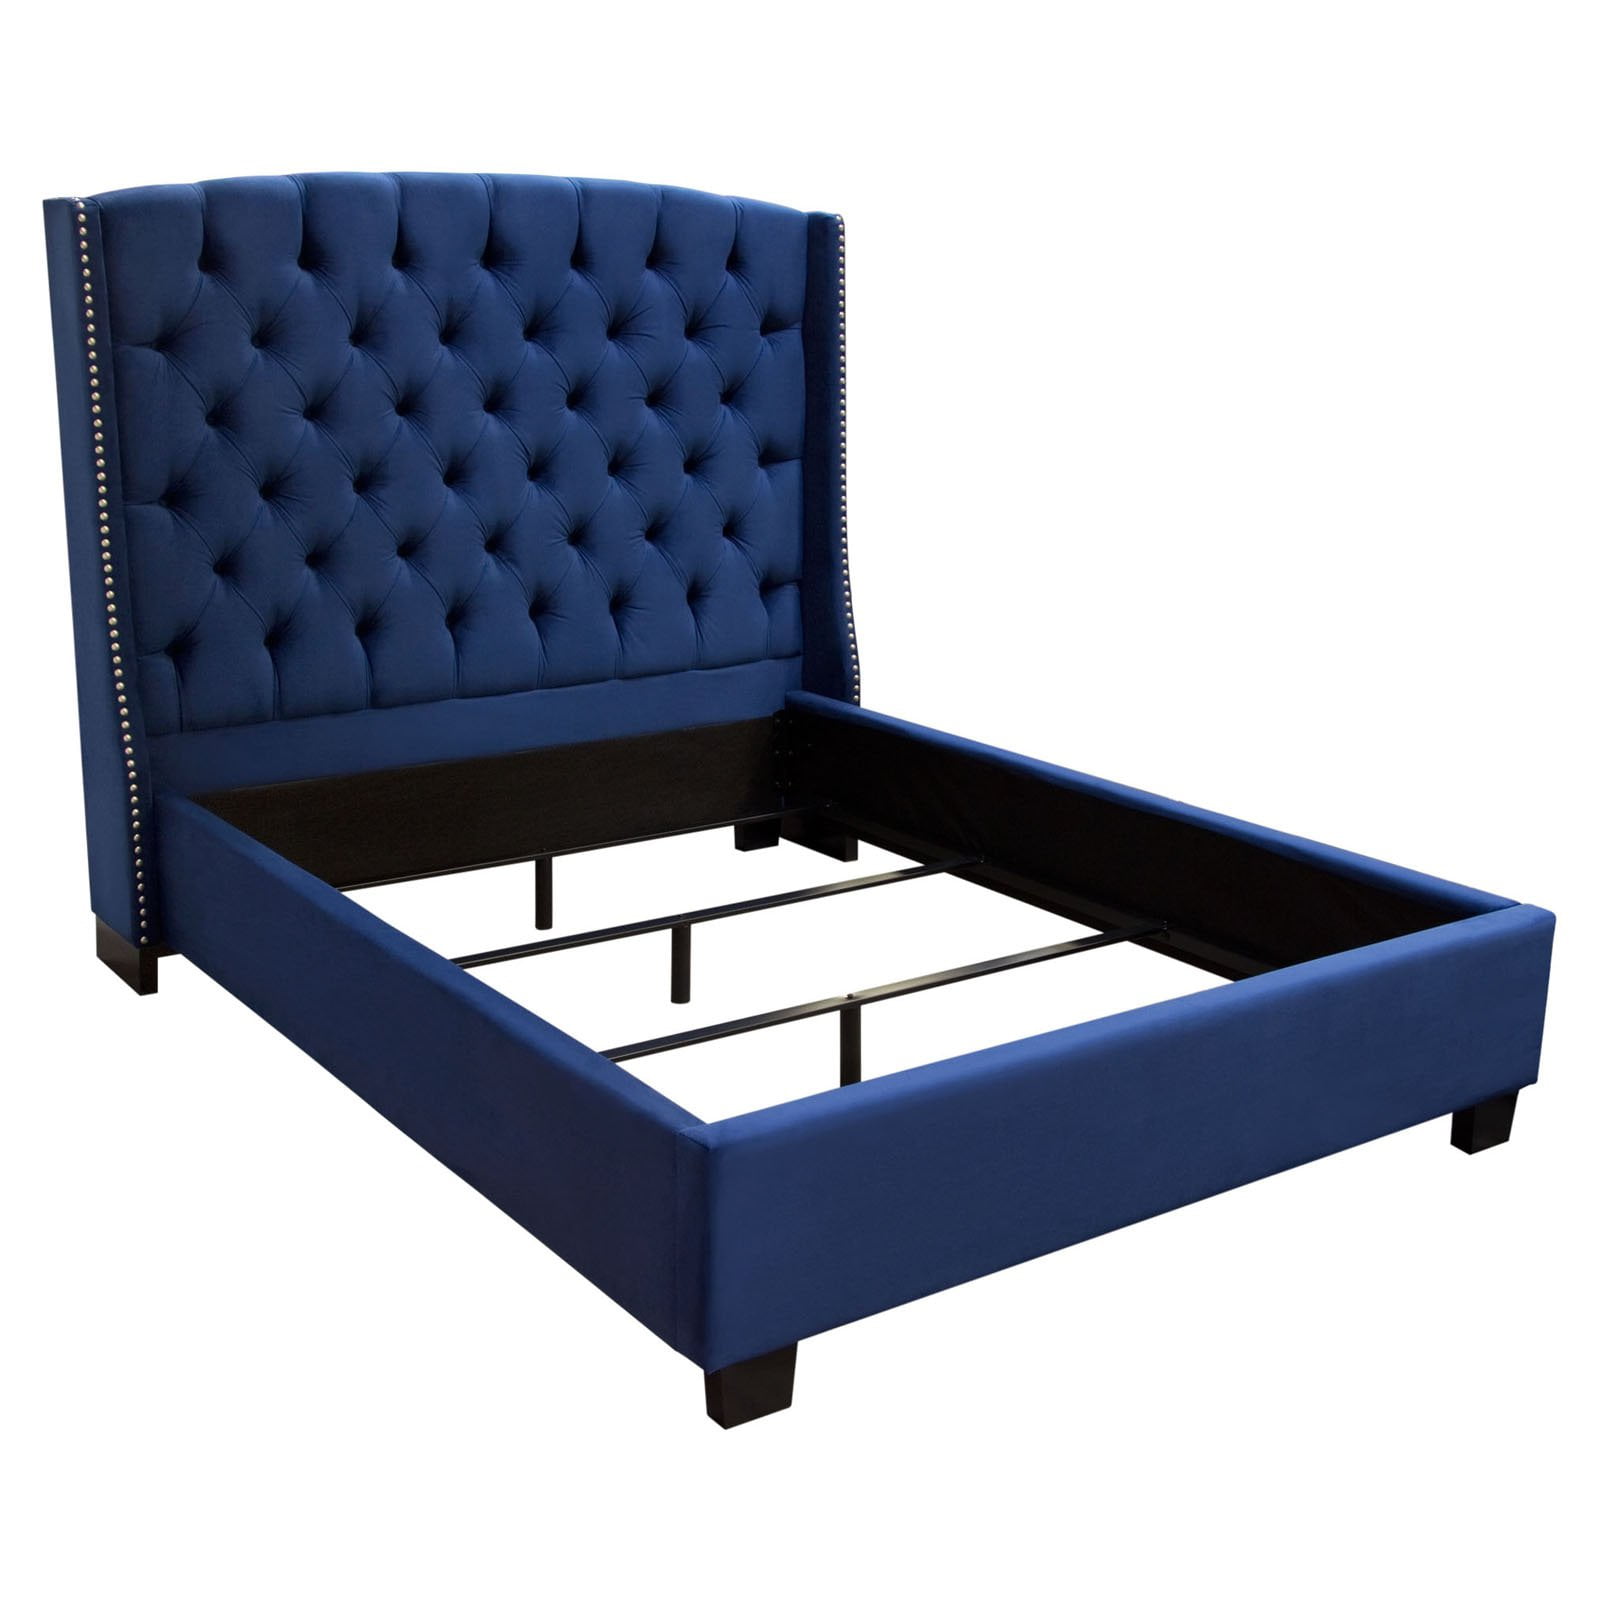 MAJESTICEKBEDNB Majestic Eastern King Size Tufted Bed with Nail Head Wing Accents, Royal Navy Blue Velvet -  Diamond Sofa